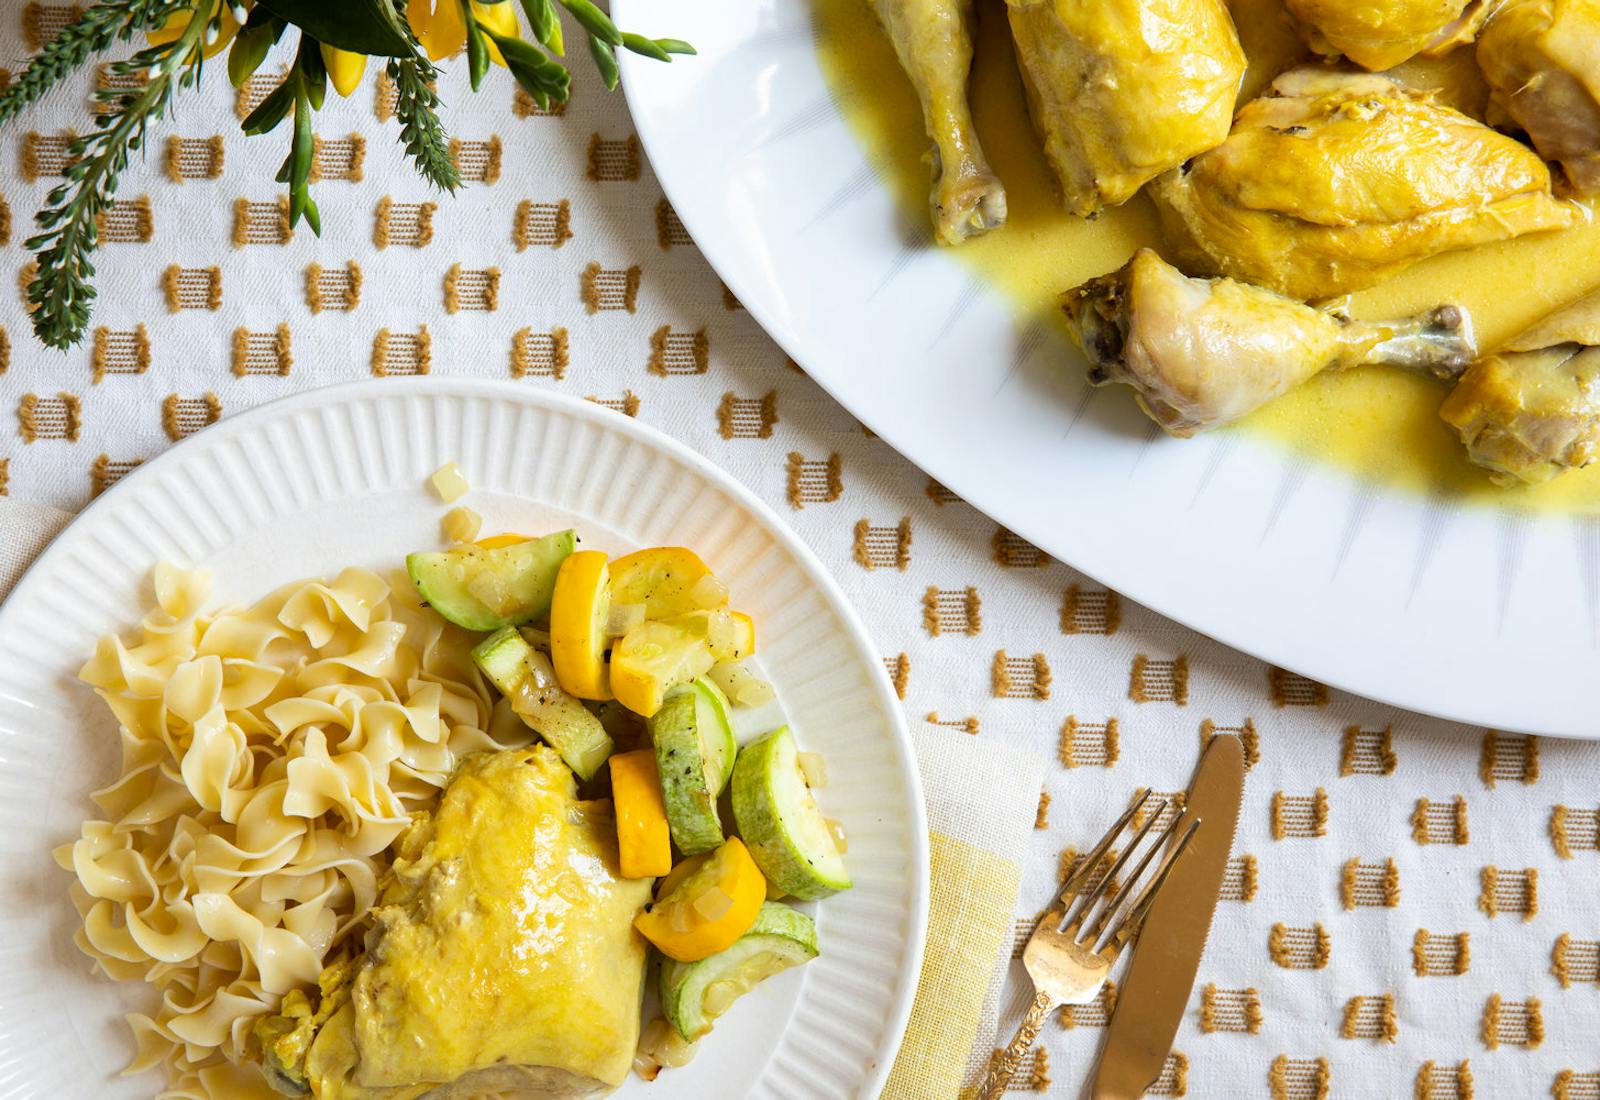 Chicken with lemon-saffron sauce with serving of chicken with roasted zucchini and pasta, atop white tablecloth with gold woven patterns.